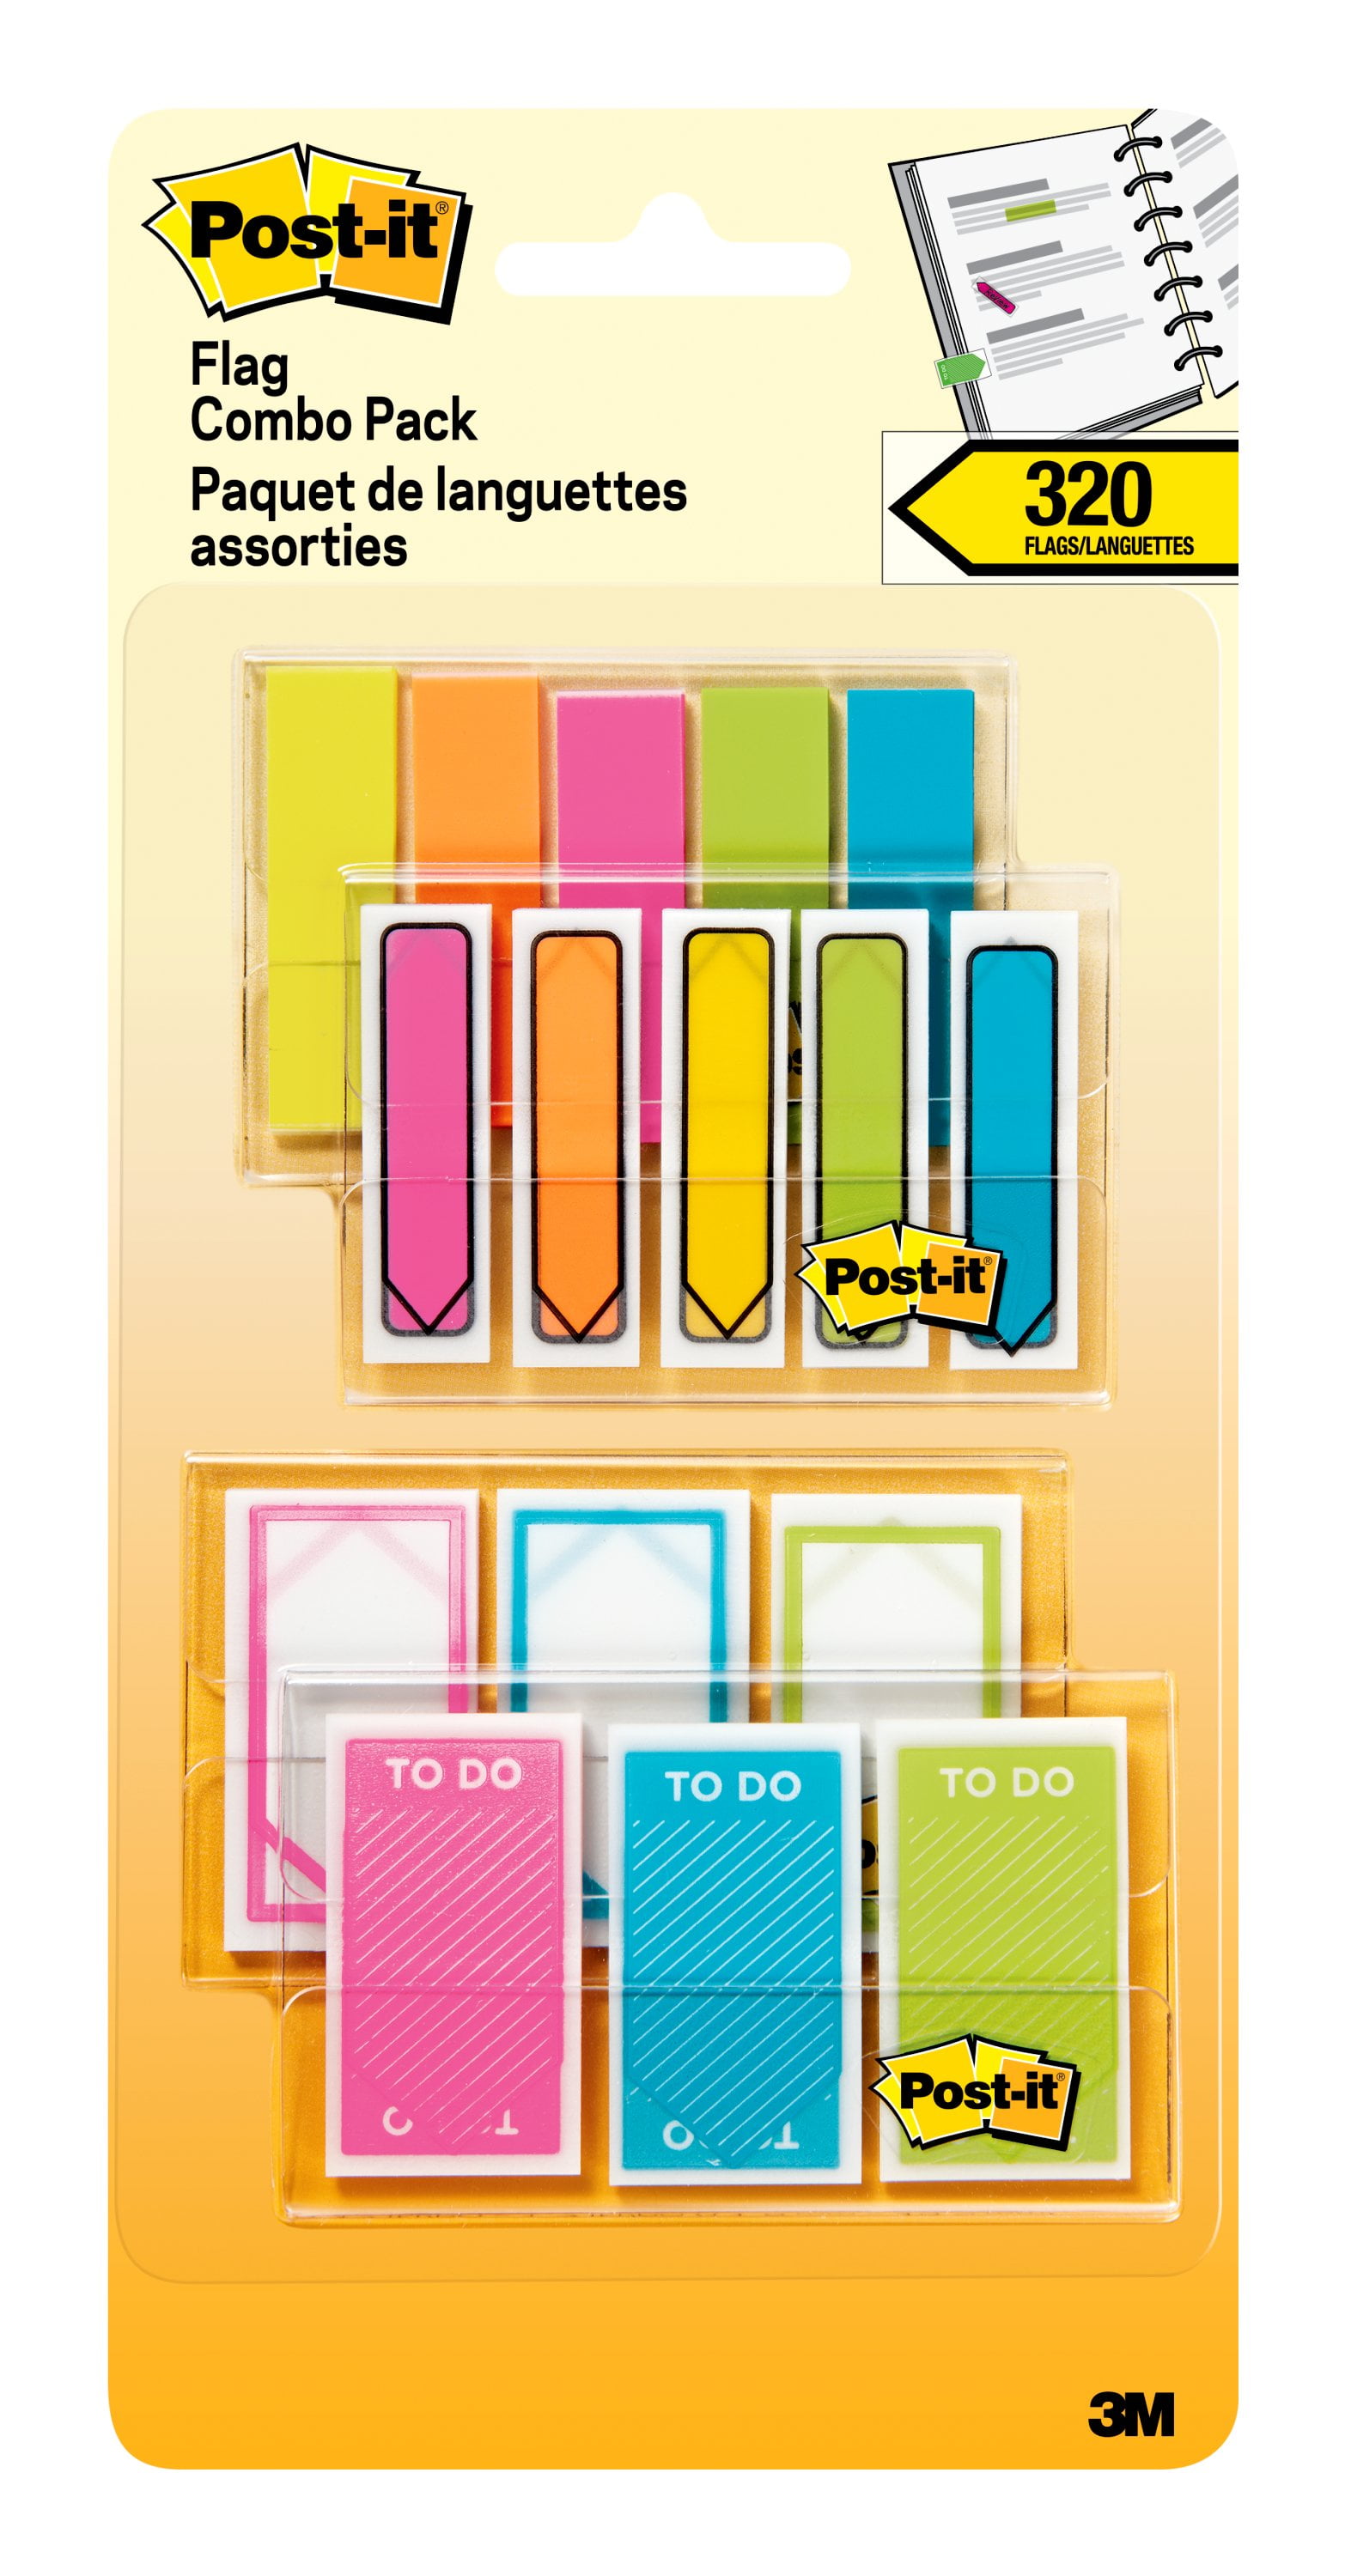 Details about   Post-it Flags Assorted Color Combo Pack 320 Flags Total 200 1-Inch Wide Flags... 